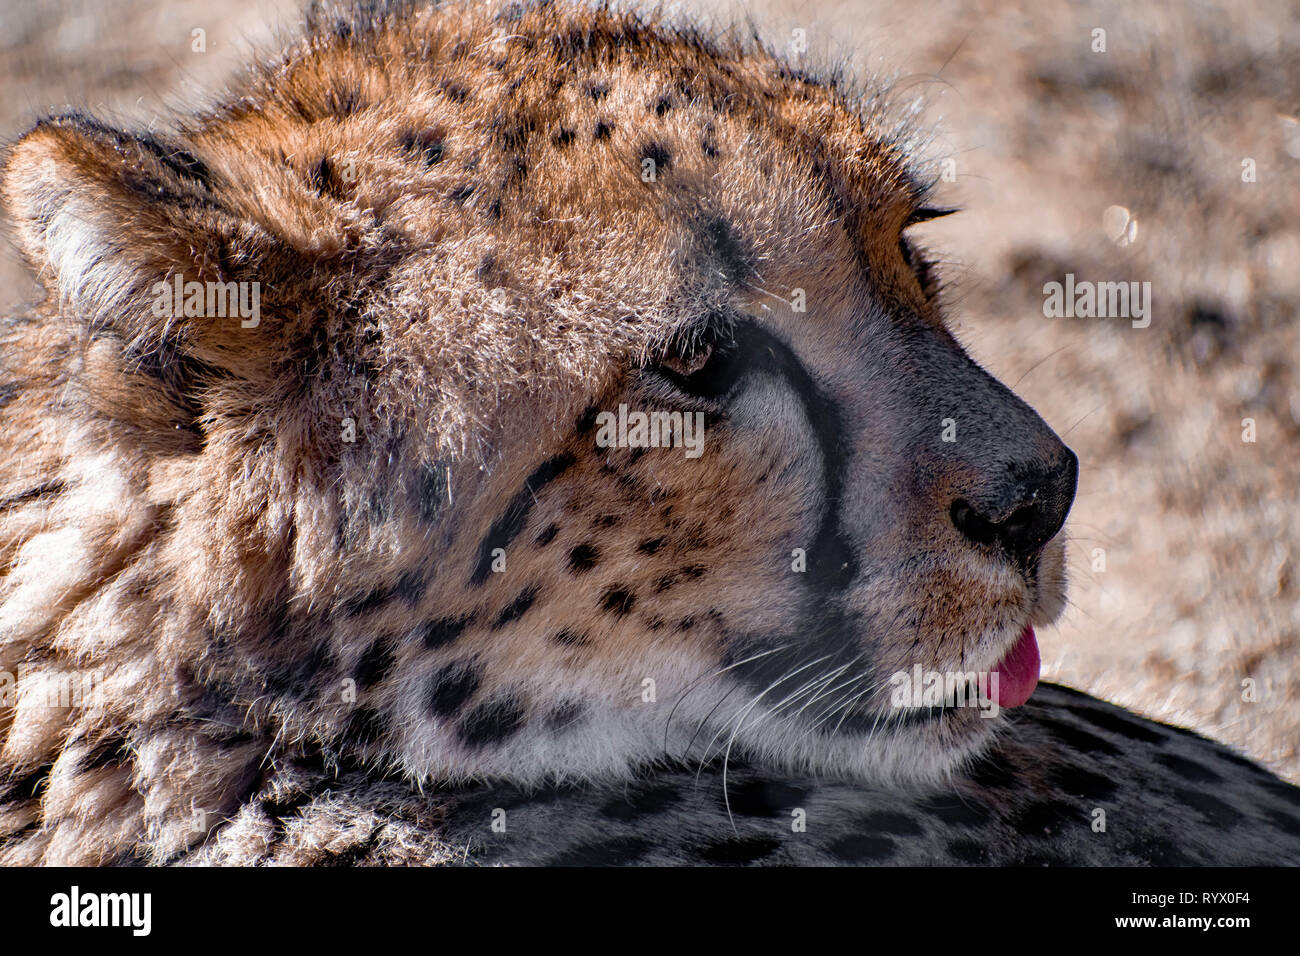 Cheetah relaxing in the warm sun with its tongue out Stock Photo